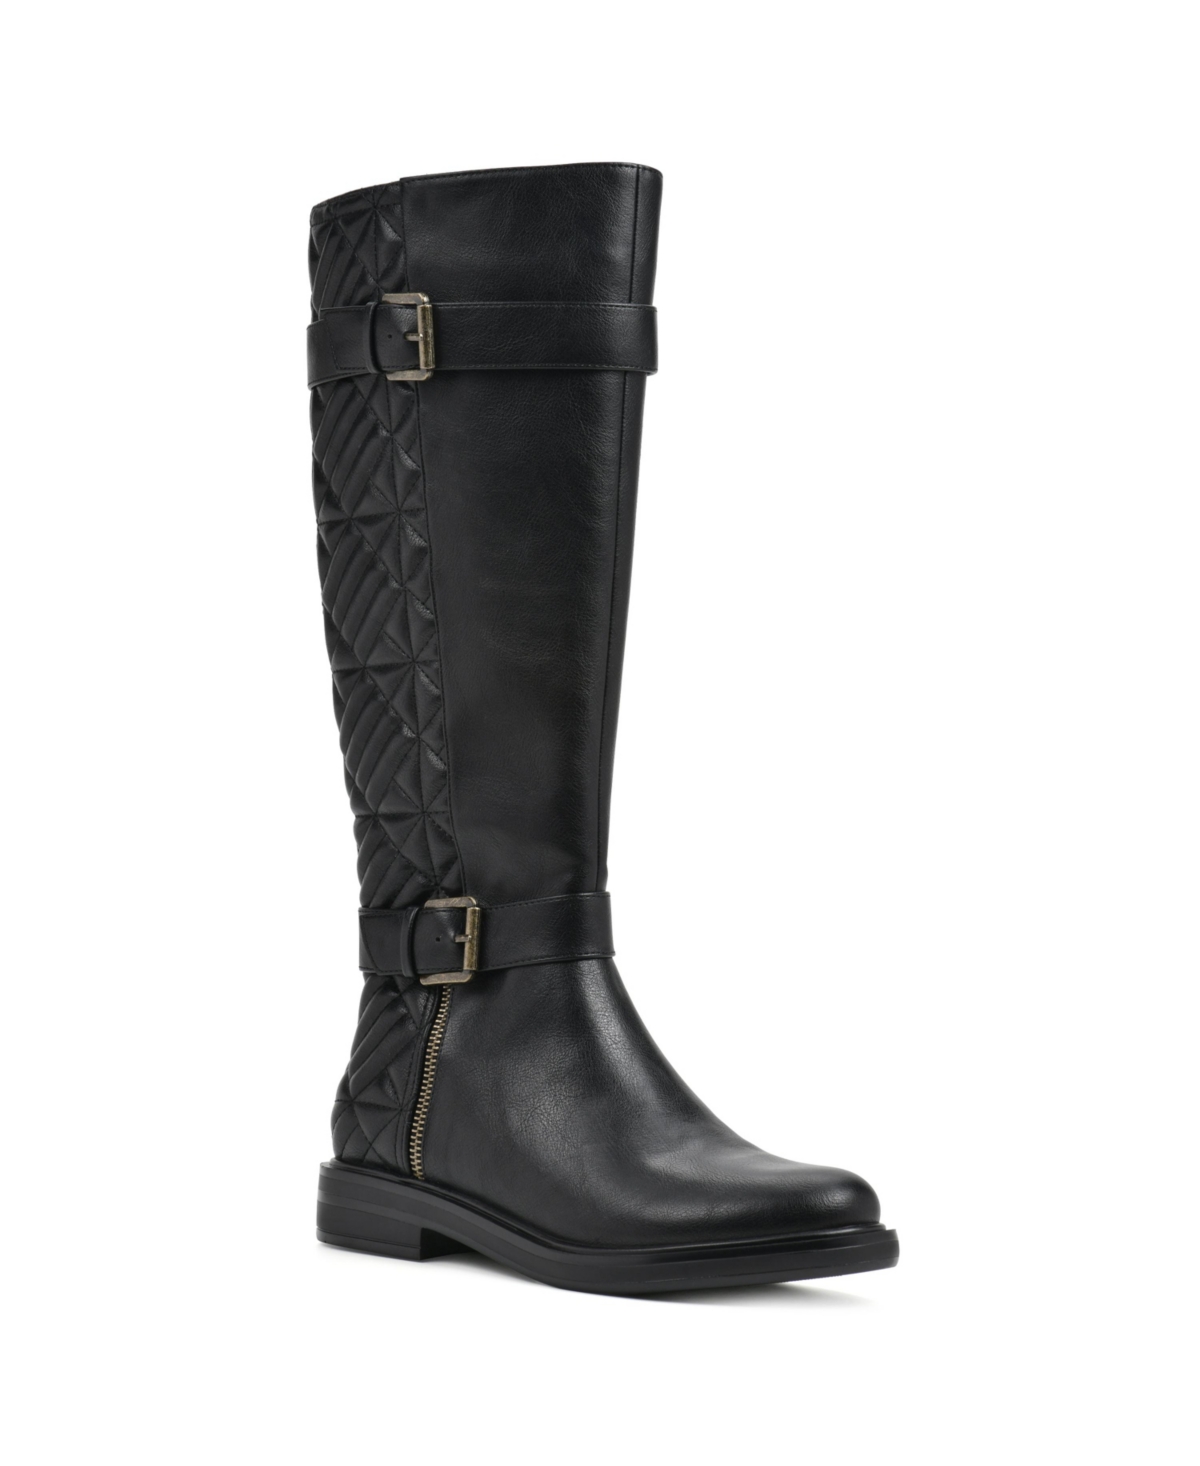 Women's Madilynn Regular Calf Tall Shaft Boot - Black Smooth with Faux Fur